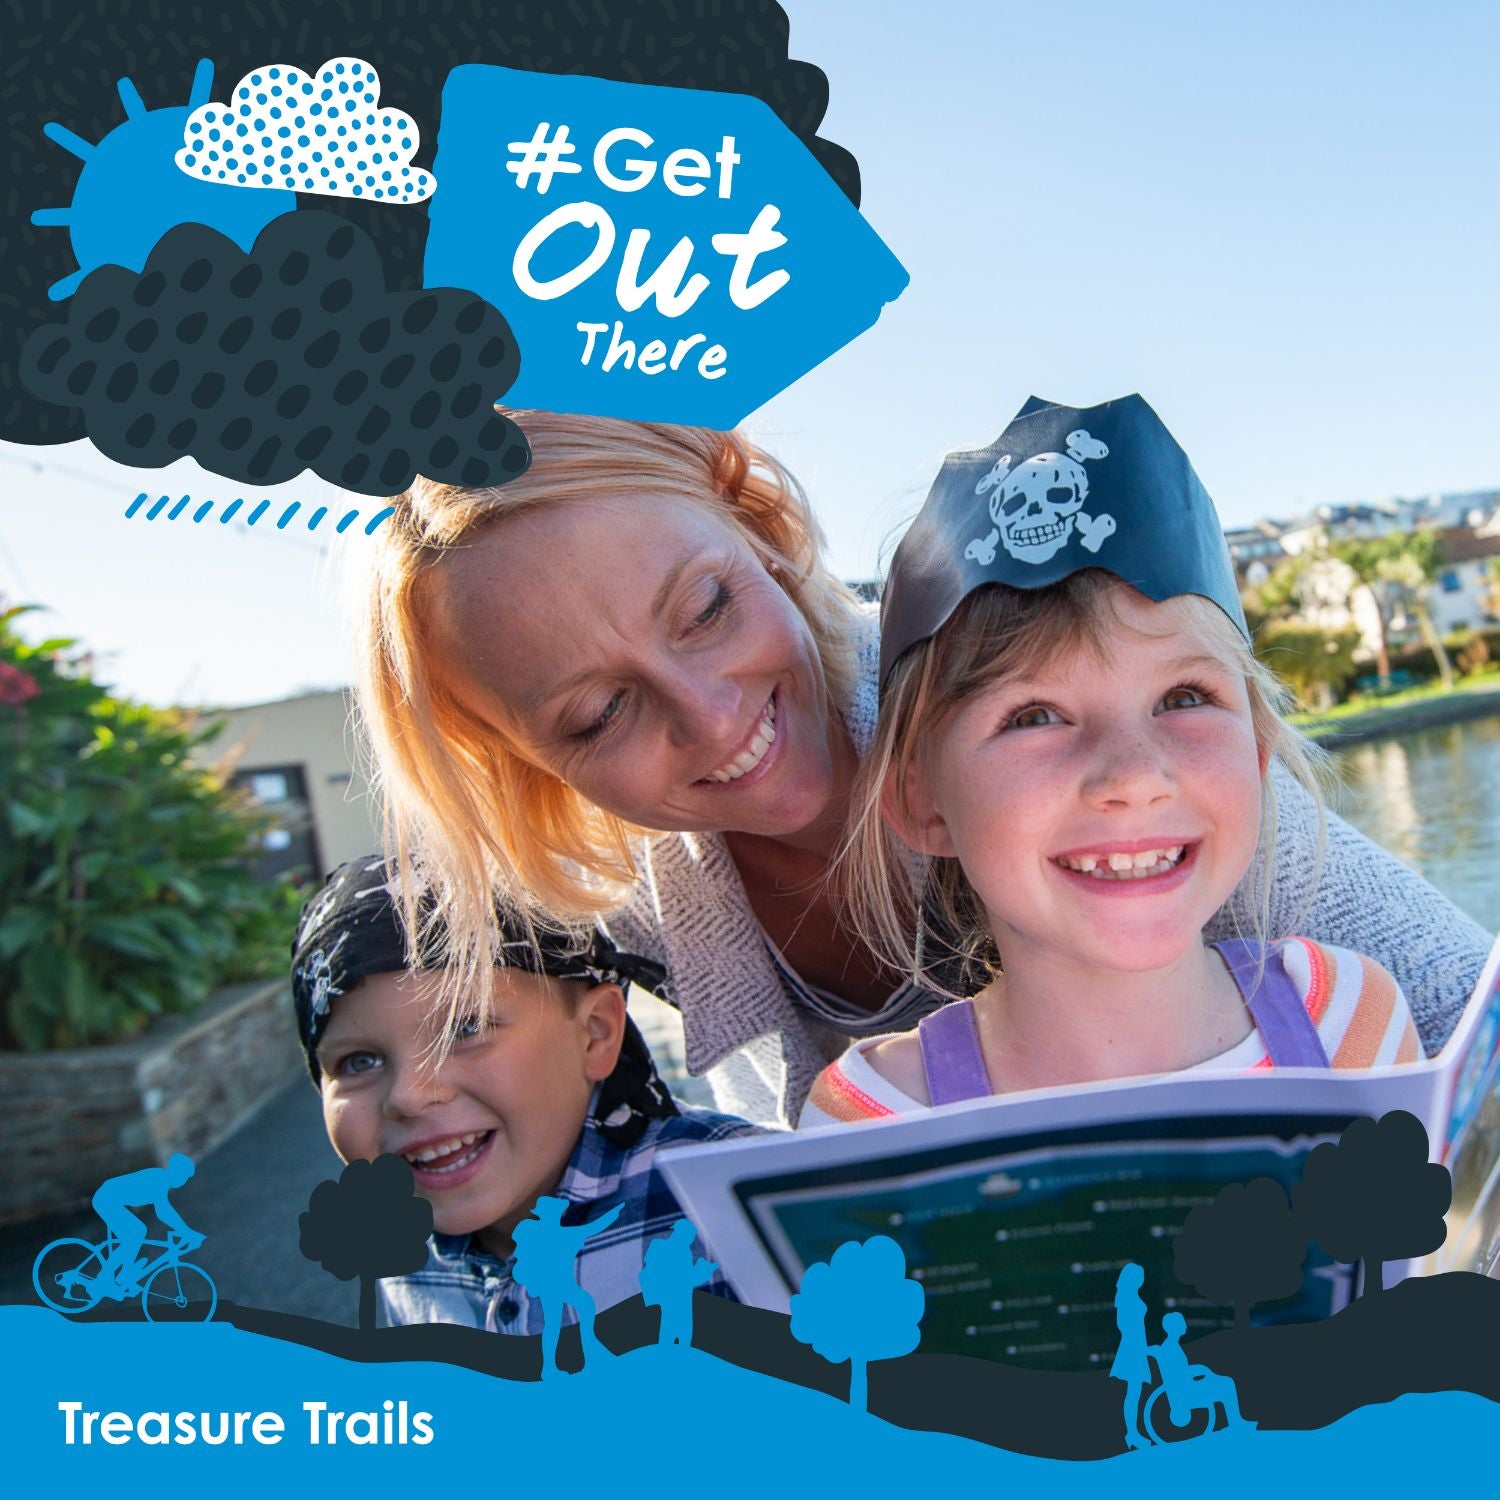 Get out there on a real-life family treasure huntGet out there on a real-life family treasure hunt